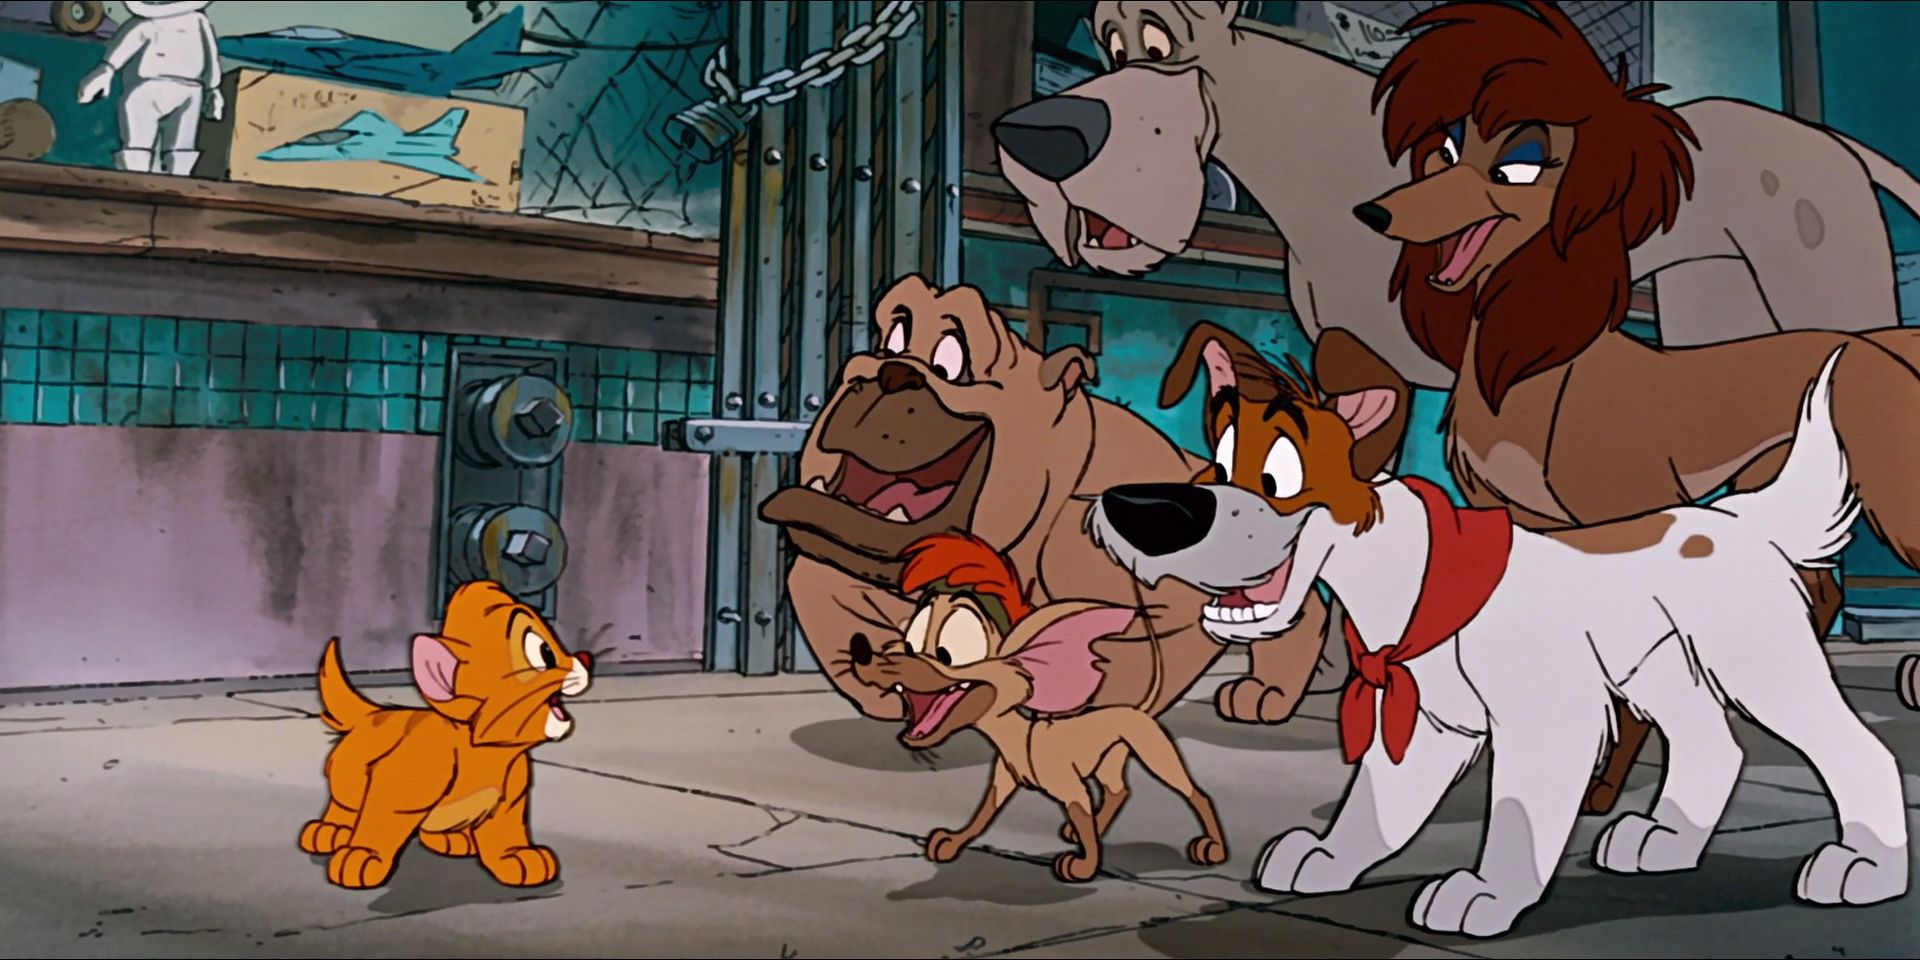 The cast of characters from Disney's Oliver and Company.